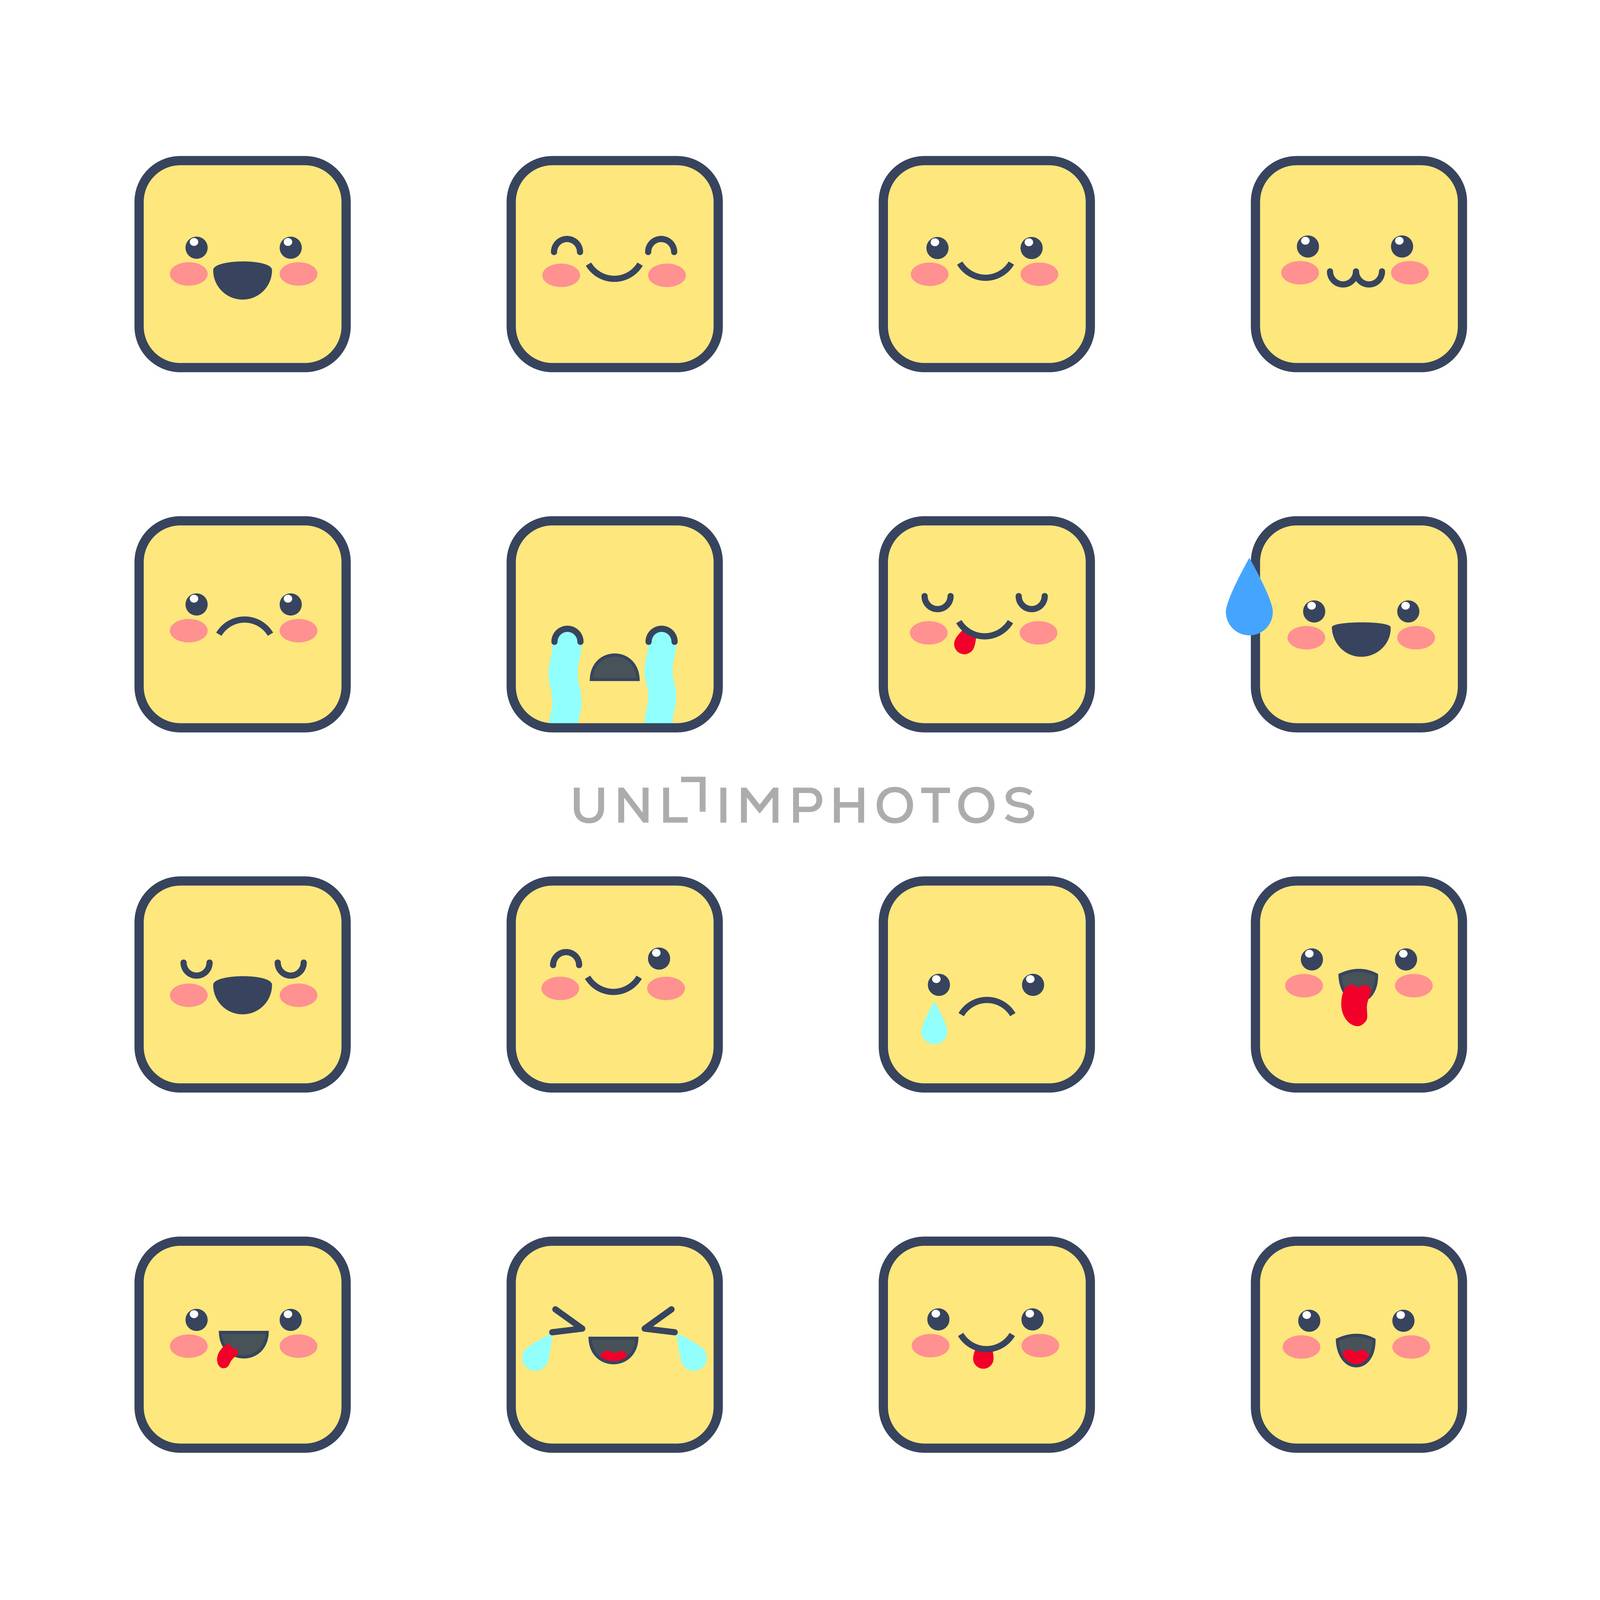 Set Emoji icons for applications and chat. Emoticons with different emotions isolated on white background. Large collection of smiles.